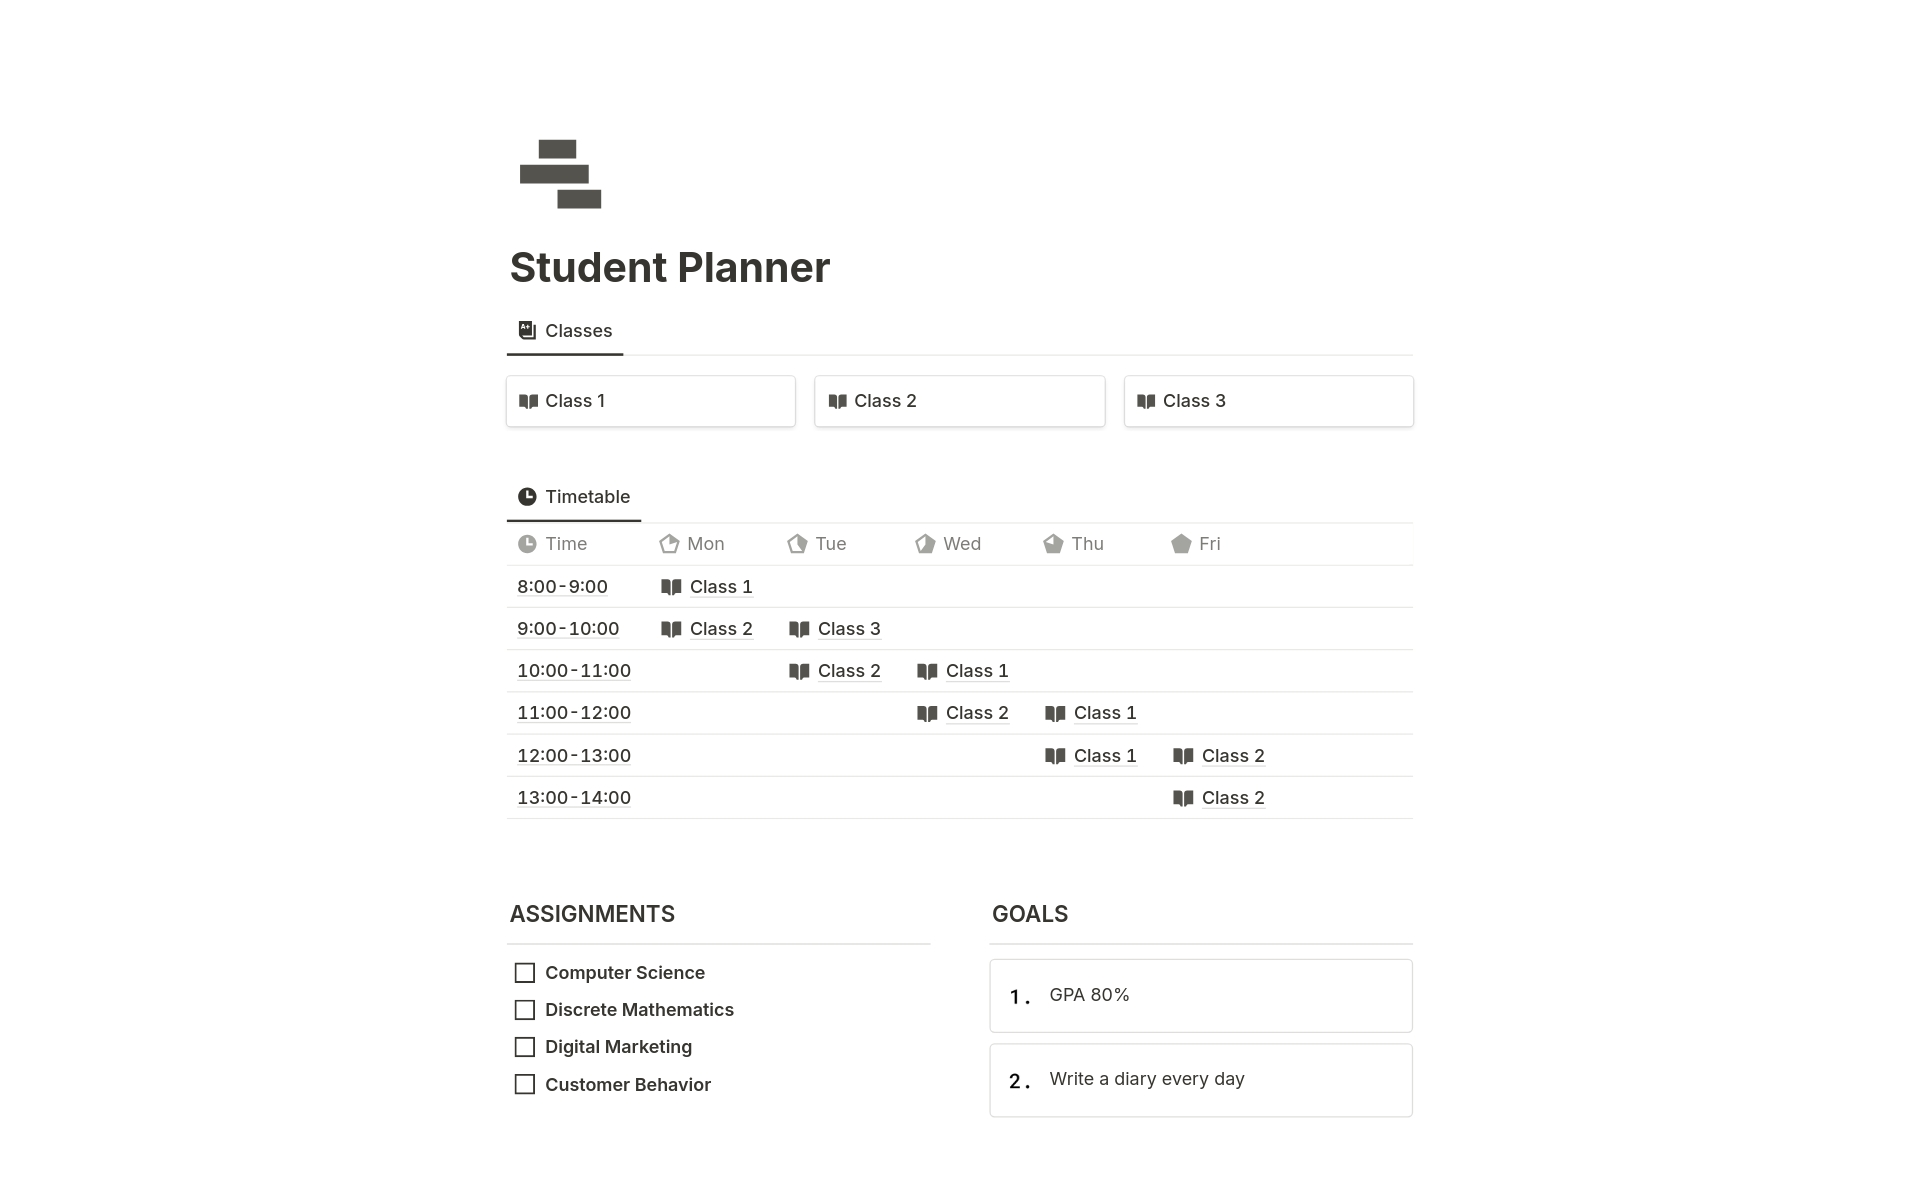 Stay organized, focused, and on top of your studies with this comprehensive Notion template. Managing your timetable to tracking assignments and semester goals, Student Planner has everything you need to excel in your academic endeavors.